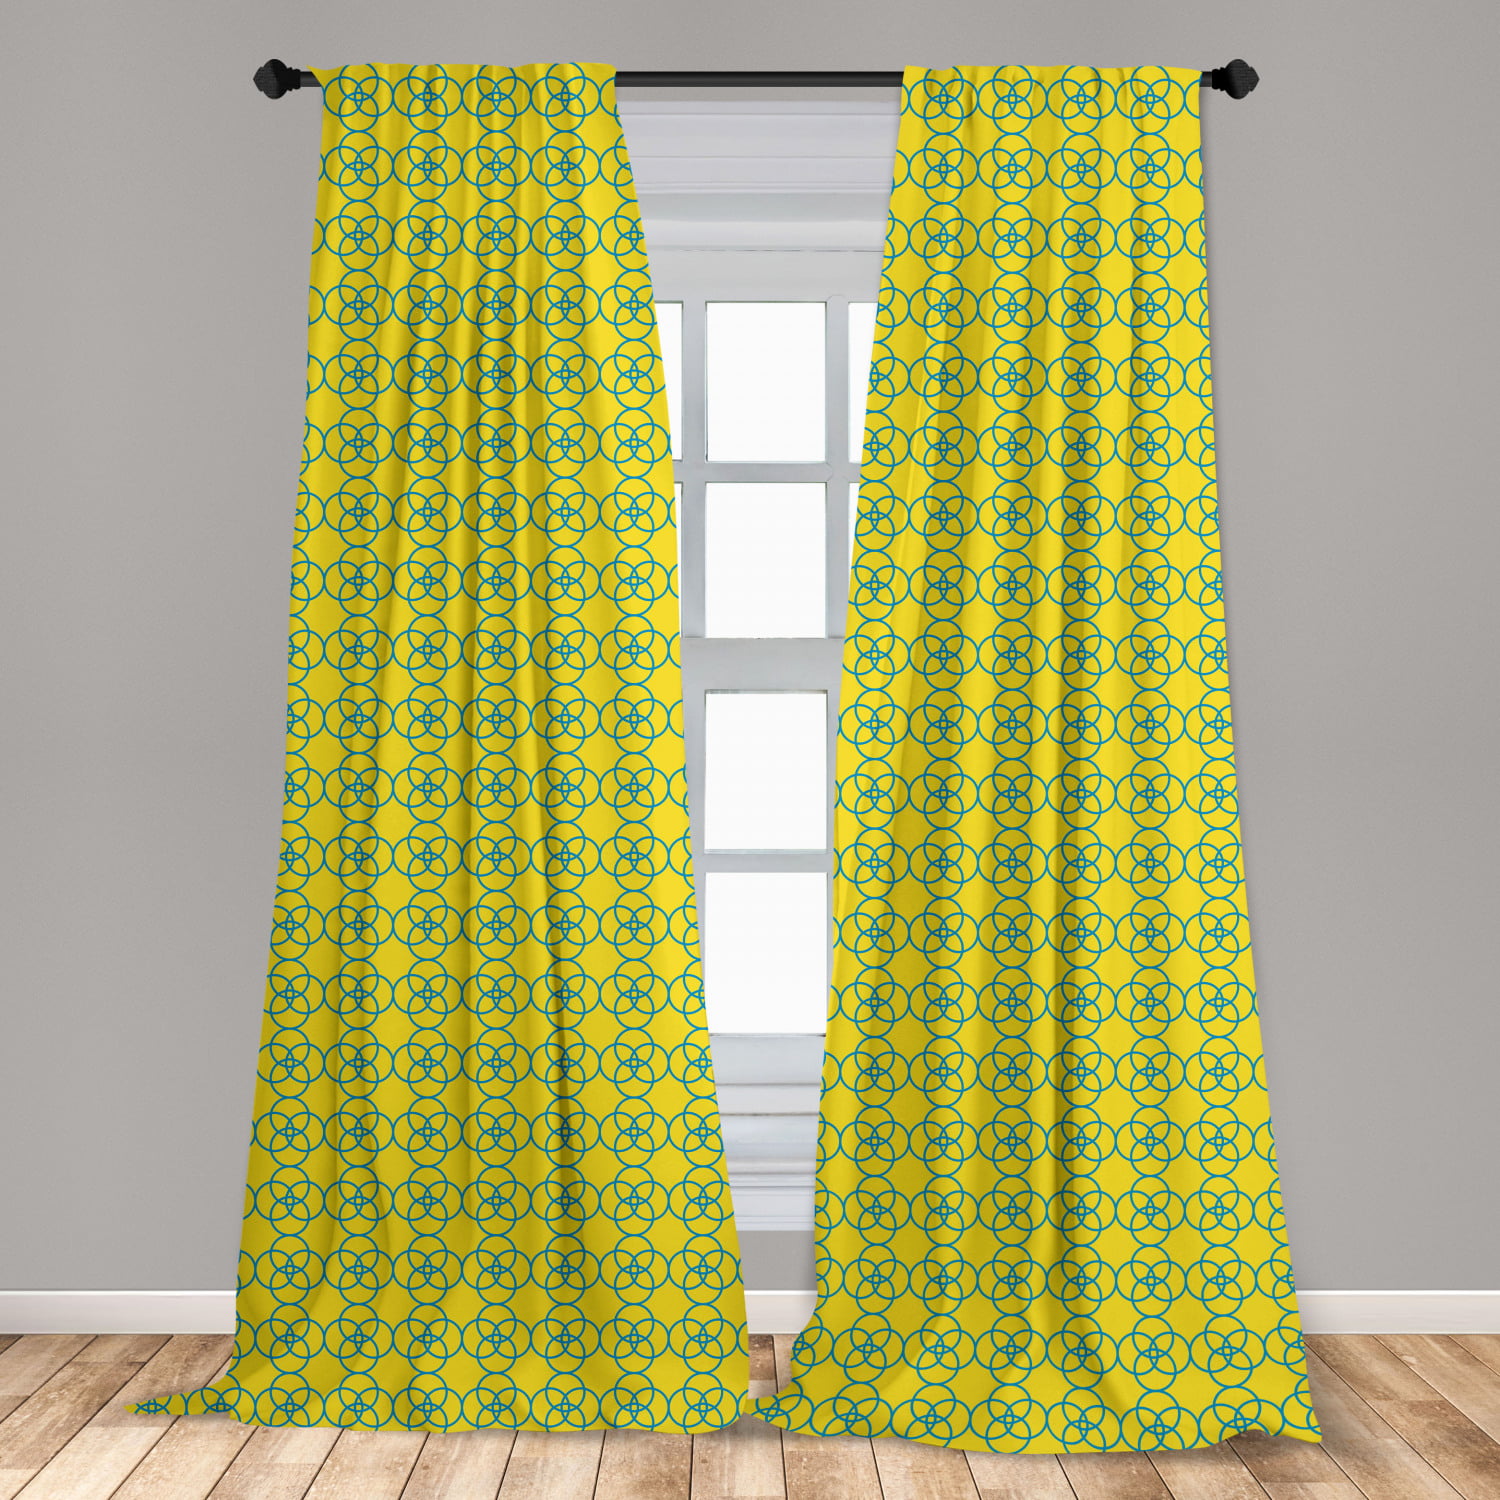 Geometric Curtains 2 Panels Set, Modern Continuous Design Circles Chains  Art Illustration Retro Influenced, Window Drapes for Living Room Bedroom,  